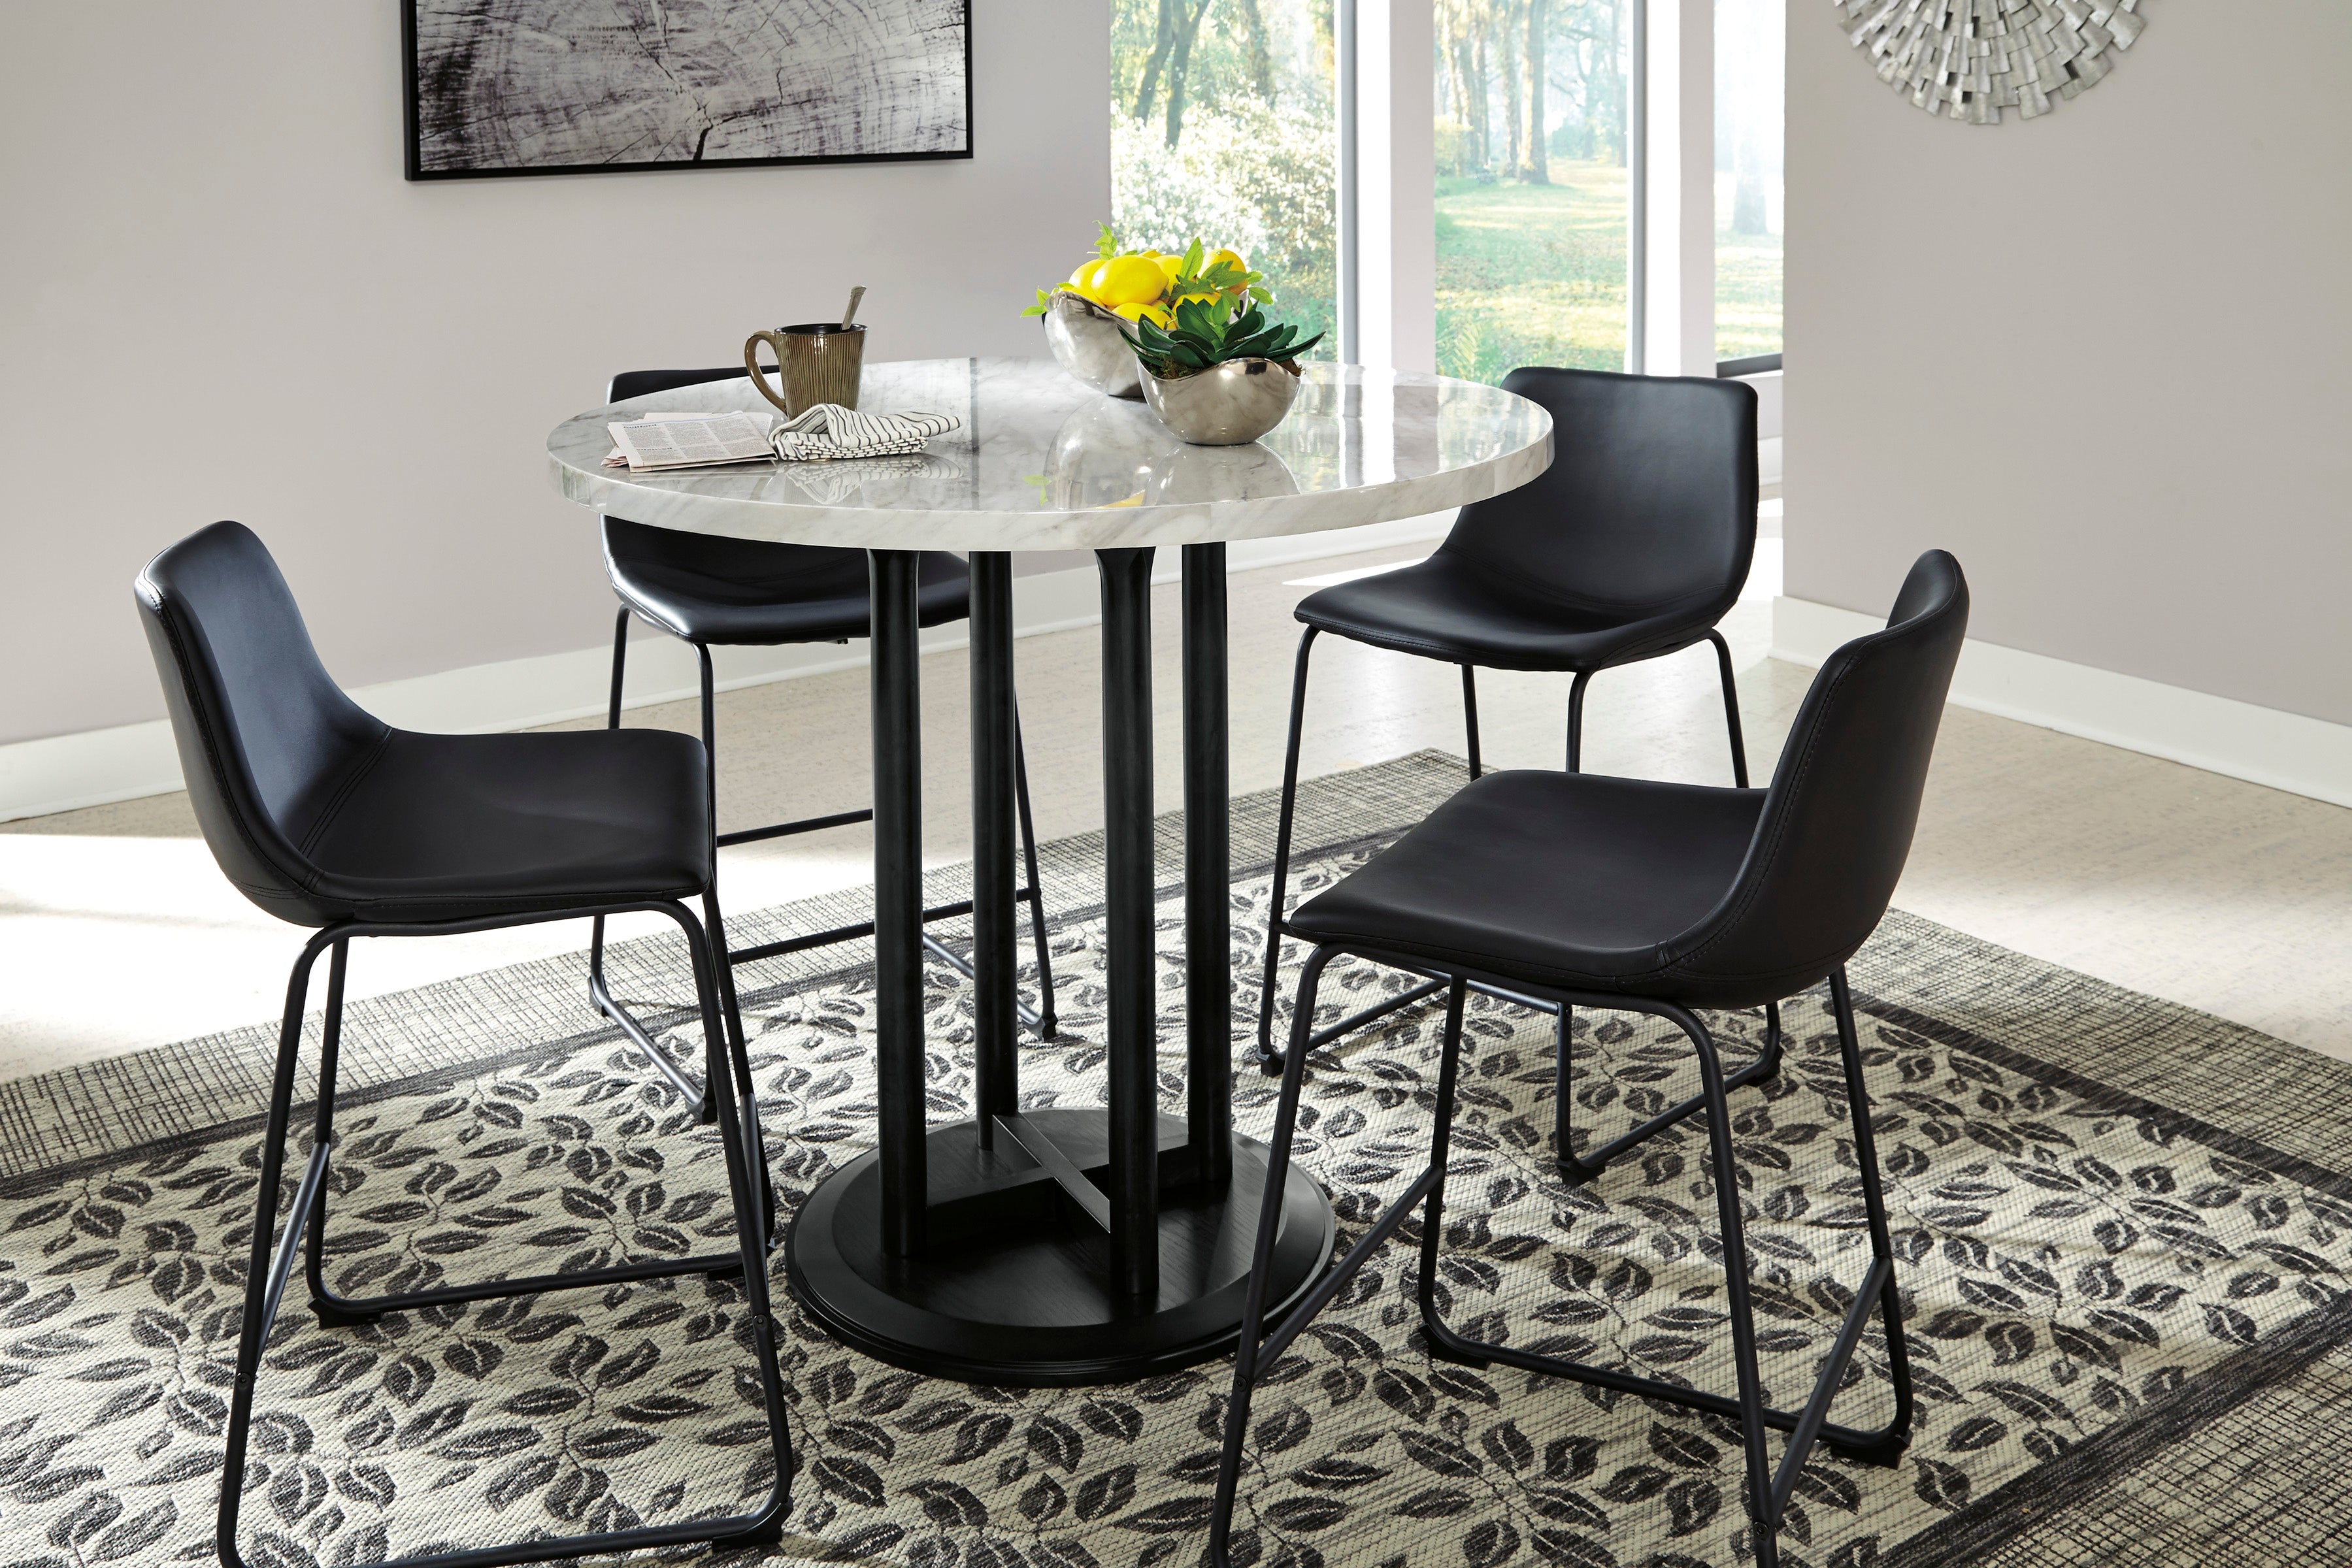 Centiar Counter Height Dining Table and 4 Barstools Set